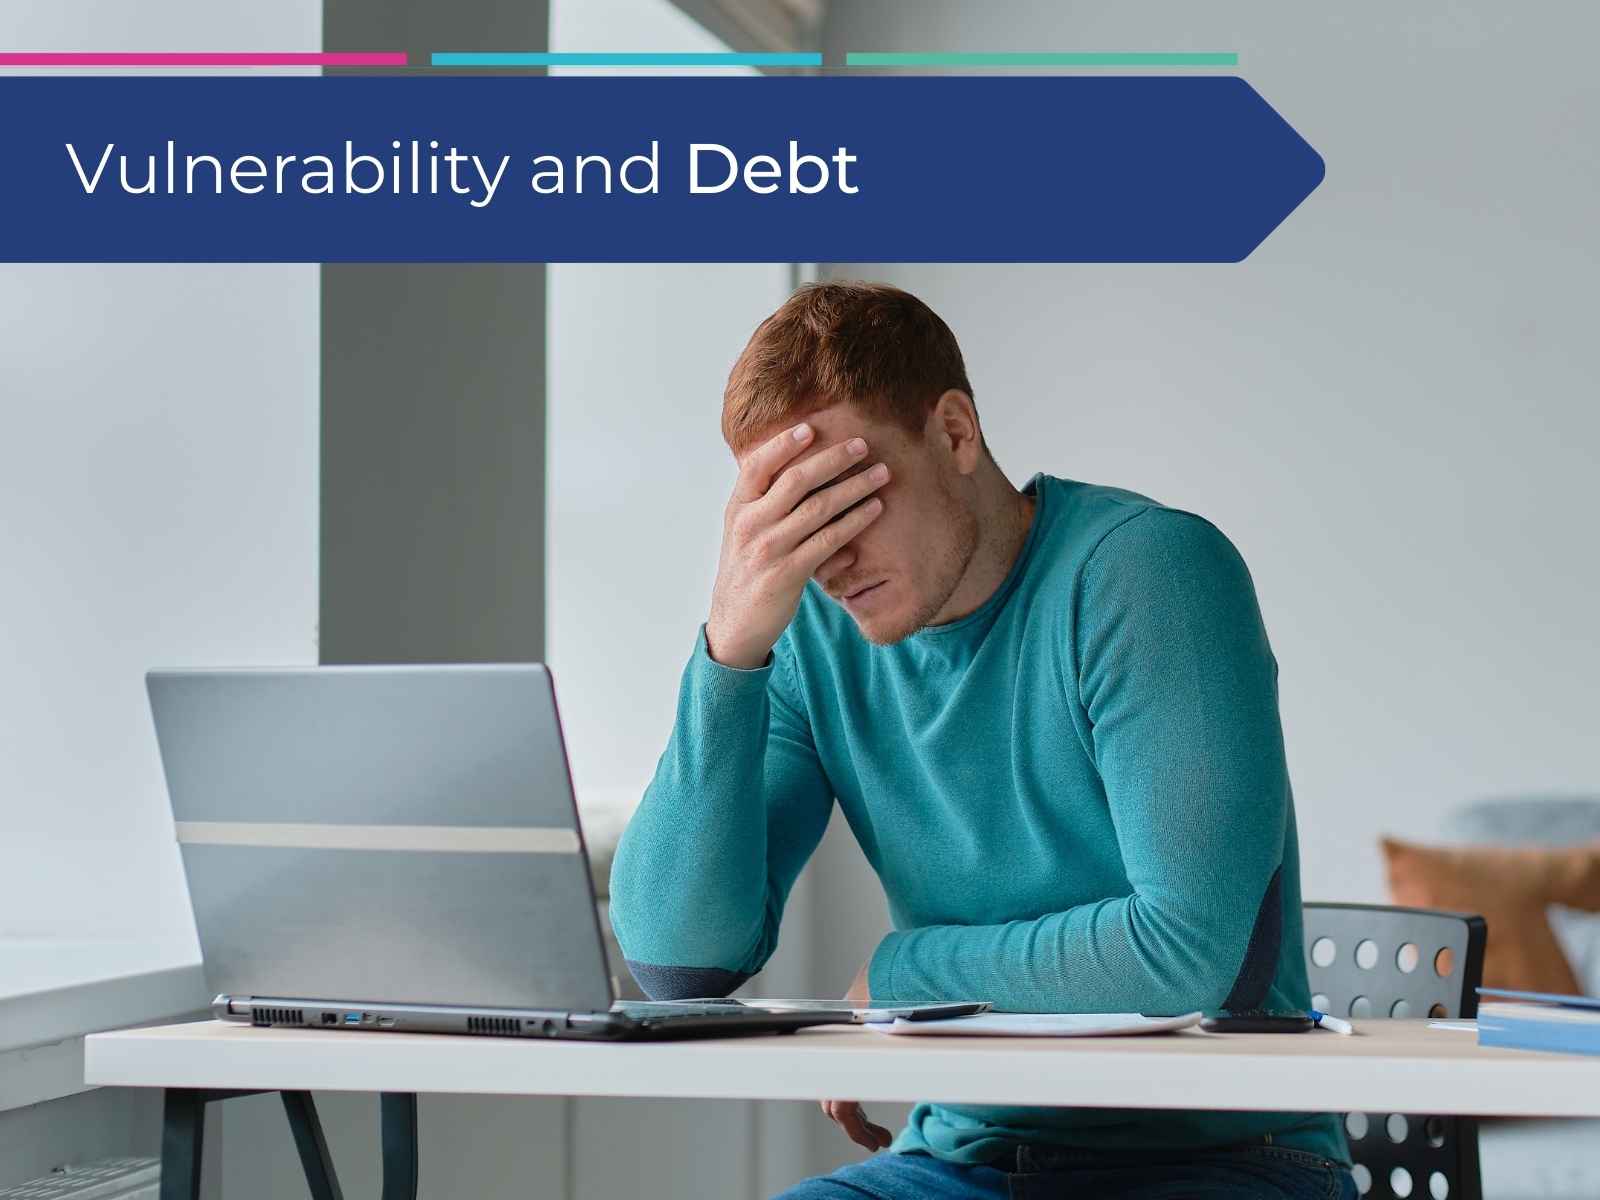 A man experiencing vulnerability because of his debt